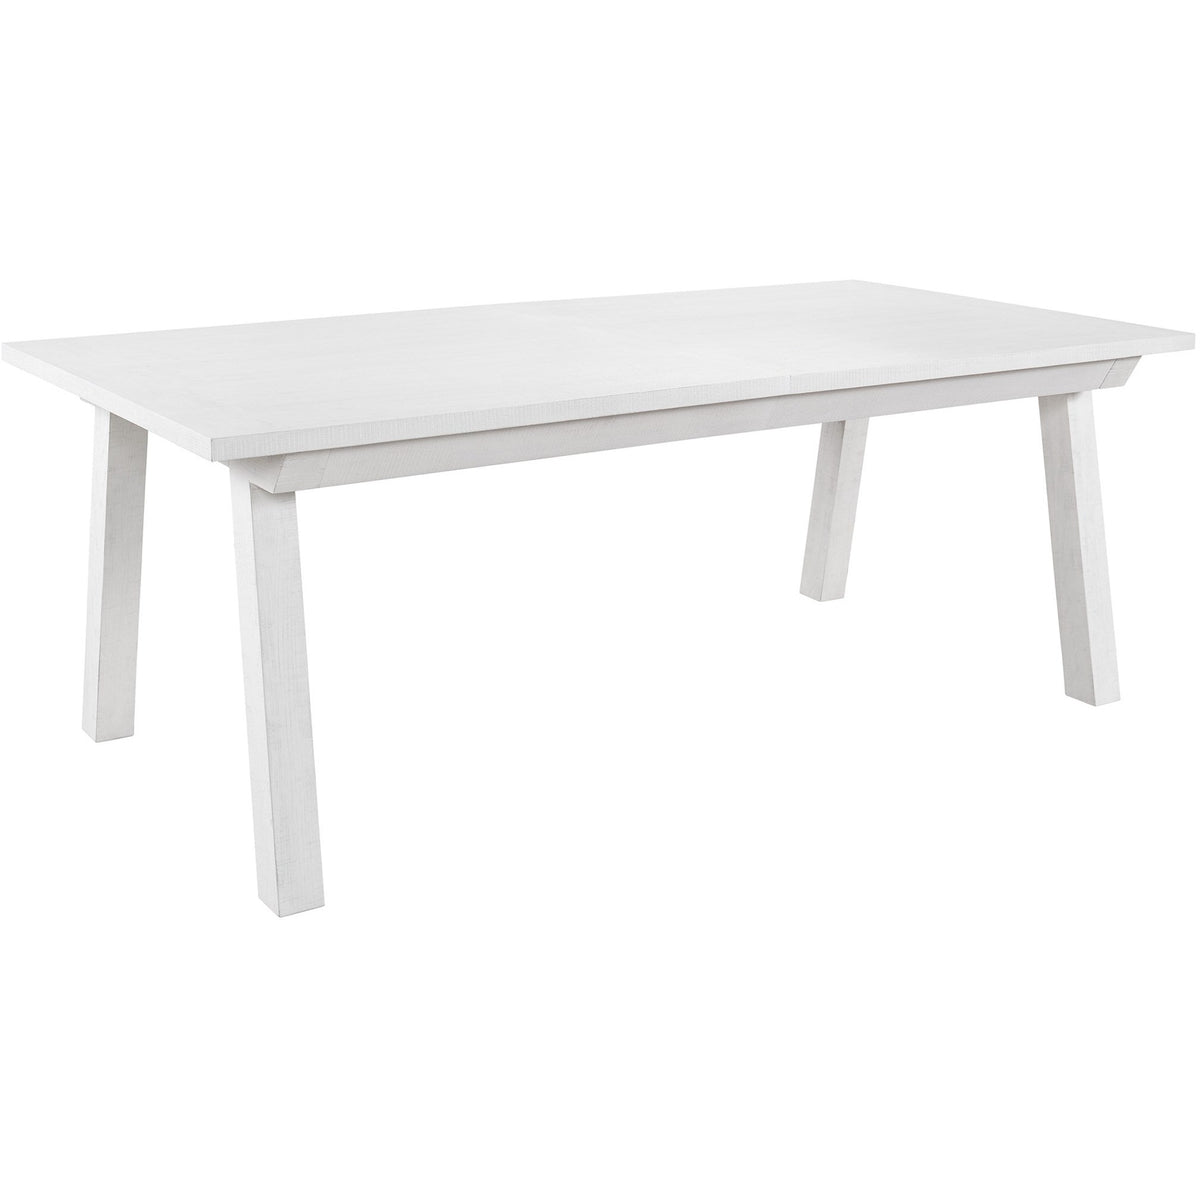 Miller Dining Table - Be Bold Furniture